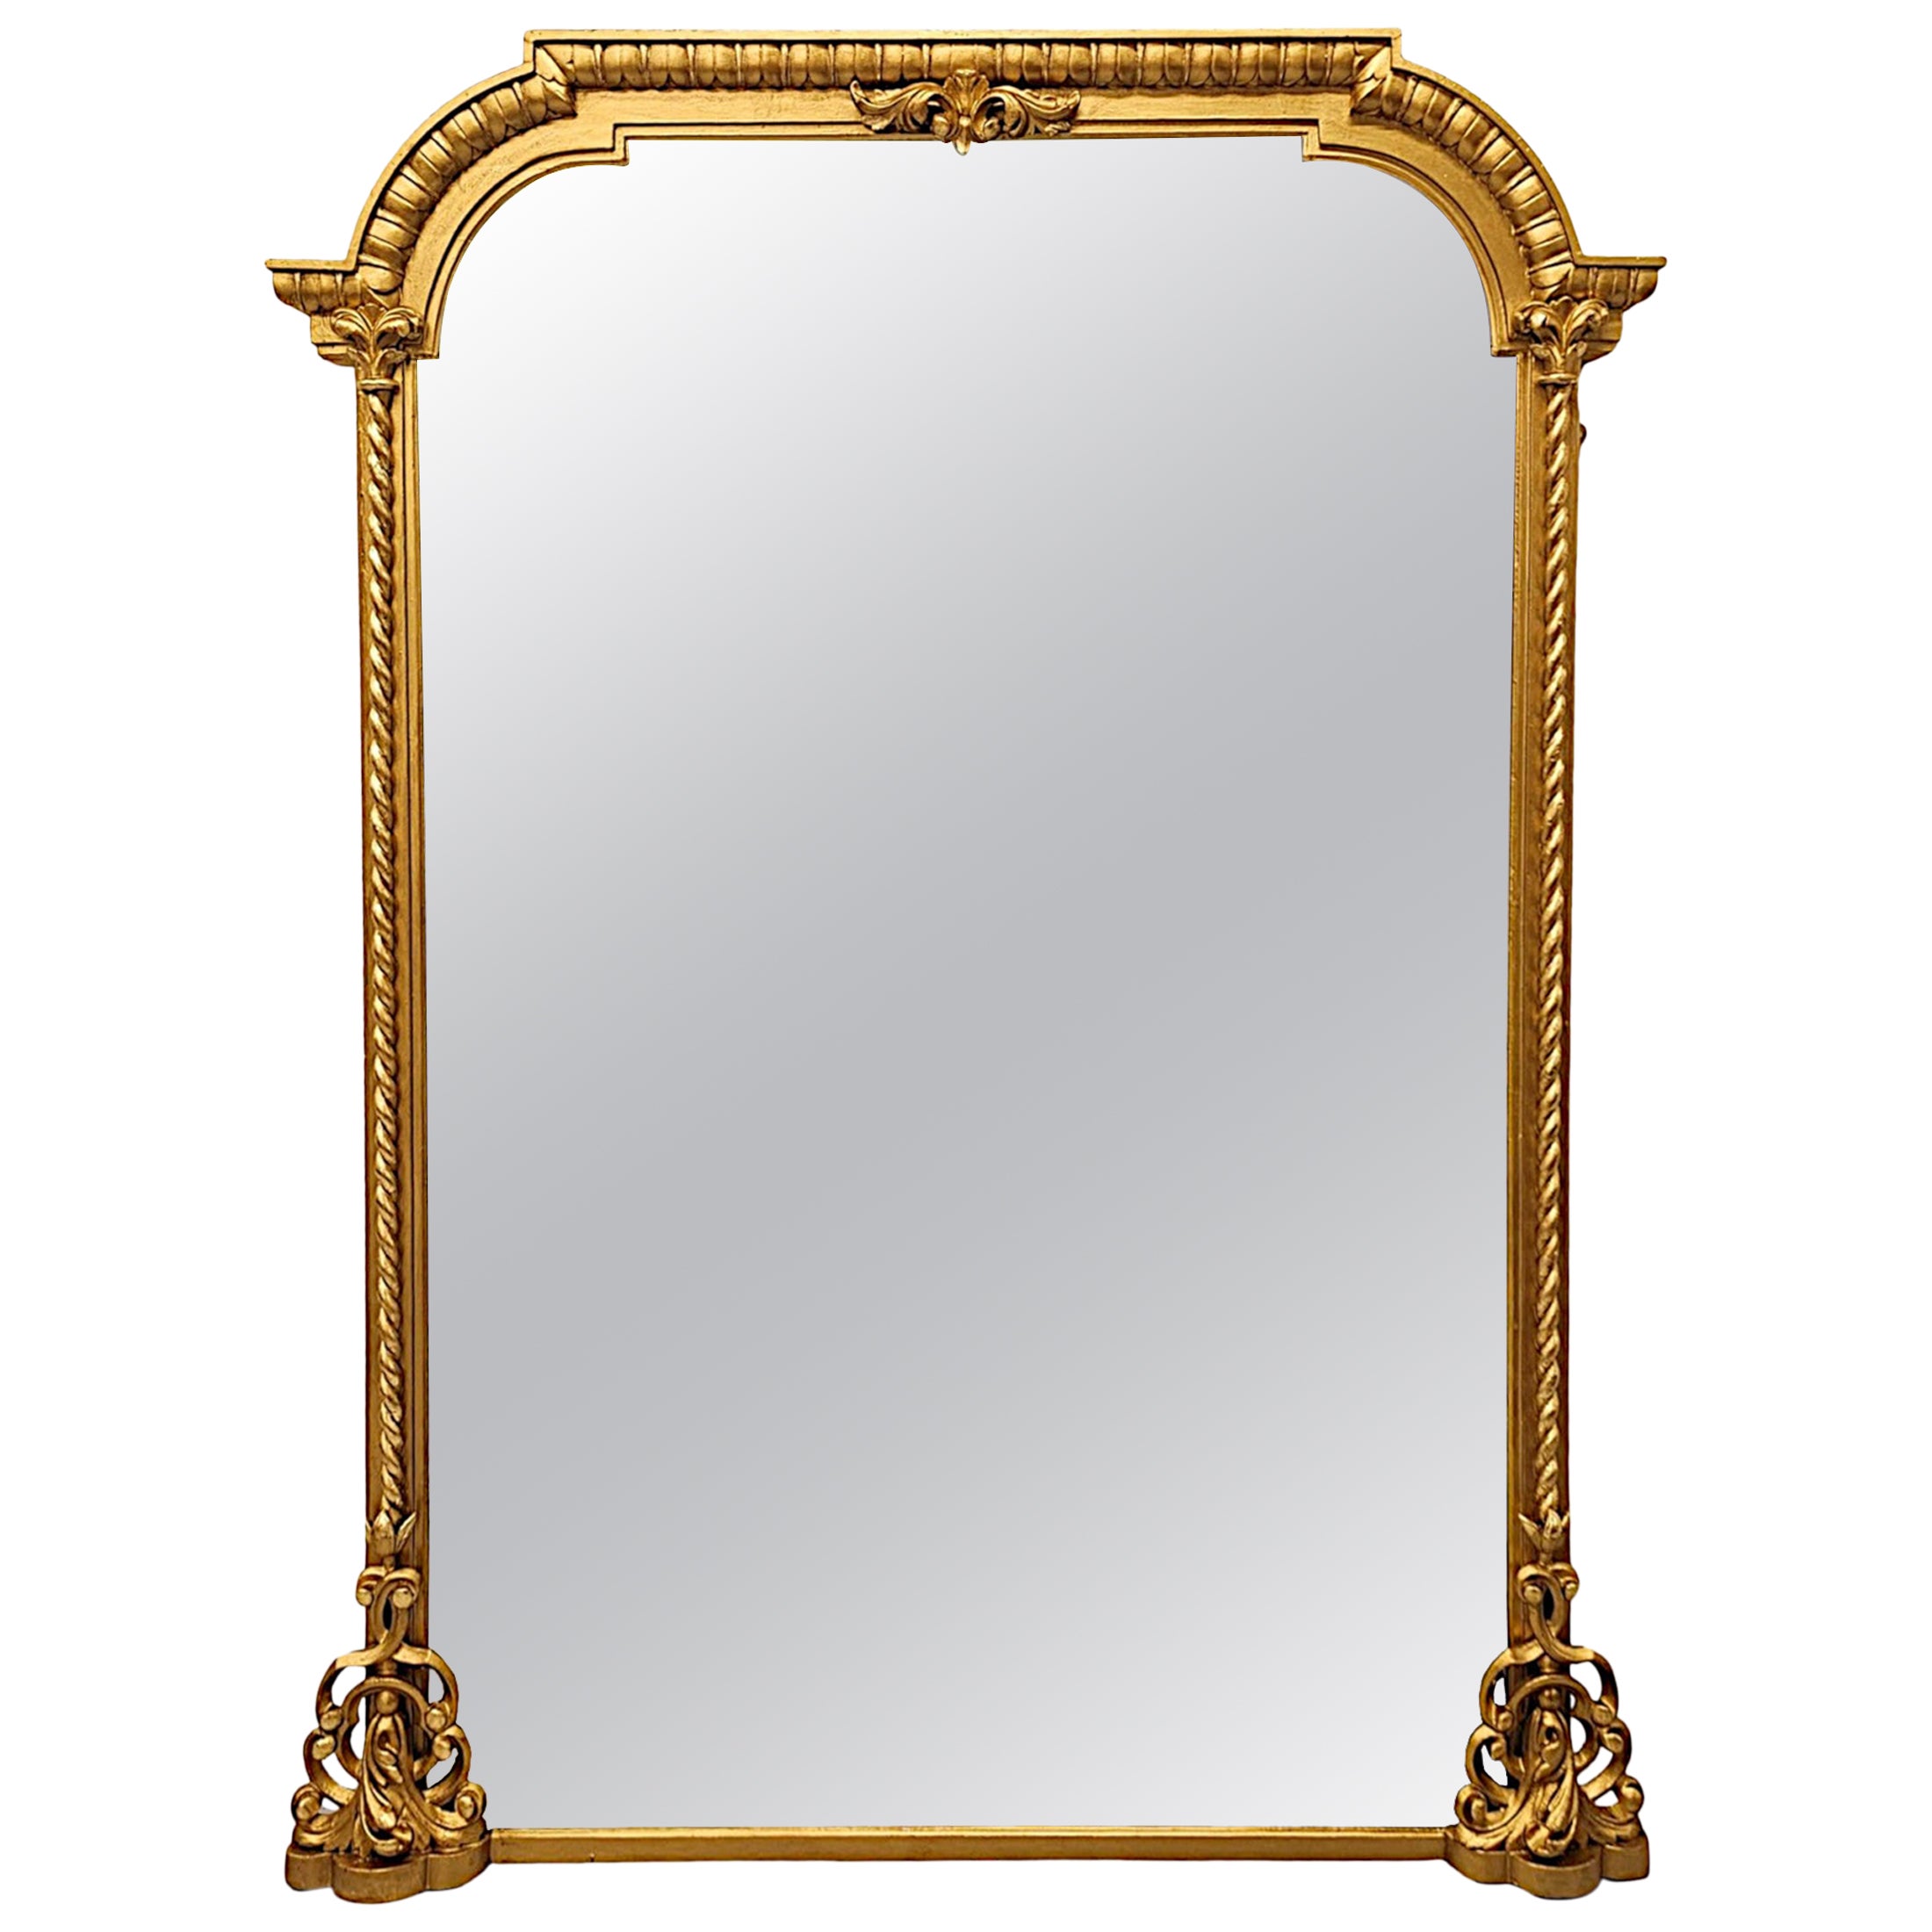 A Fabulous 19th Century Giltwood Overmantel Mirror